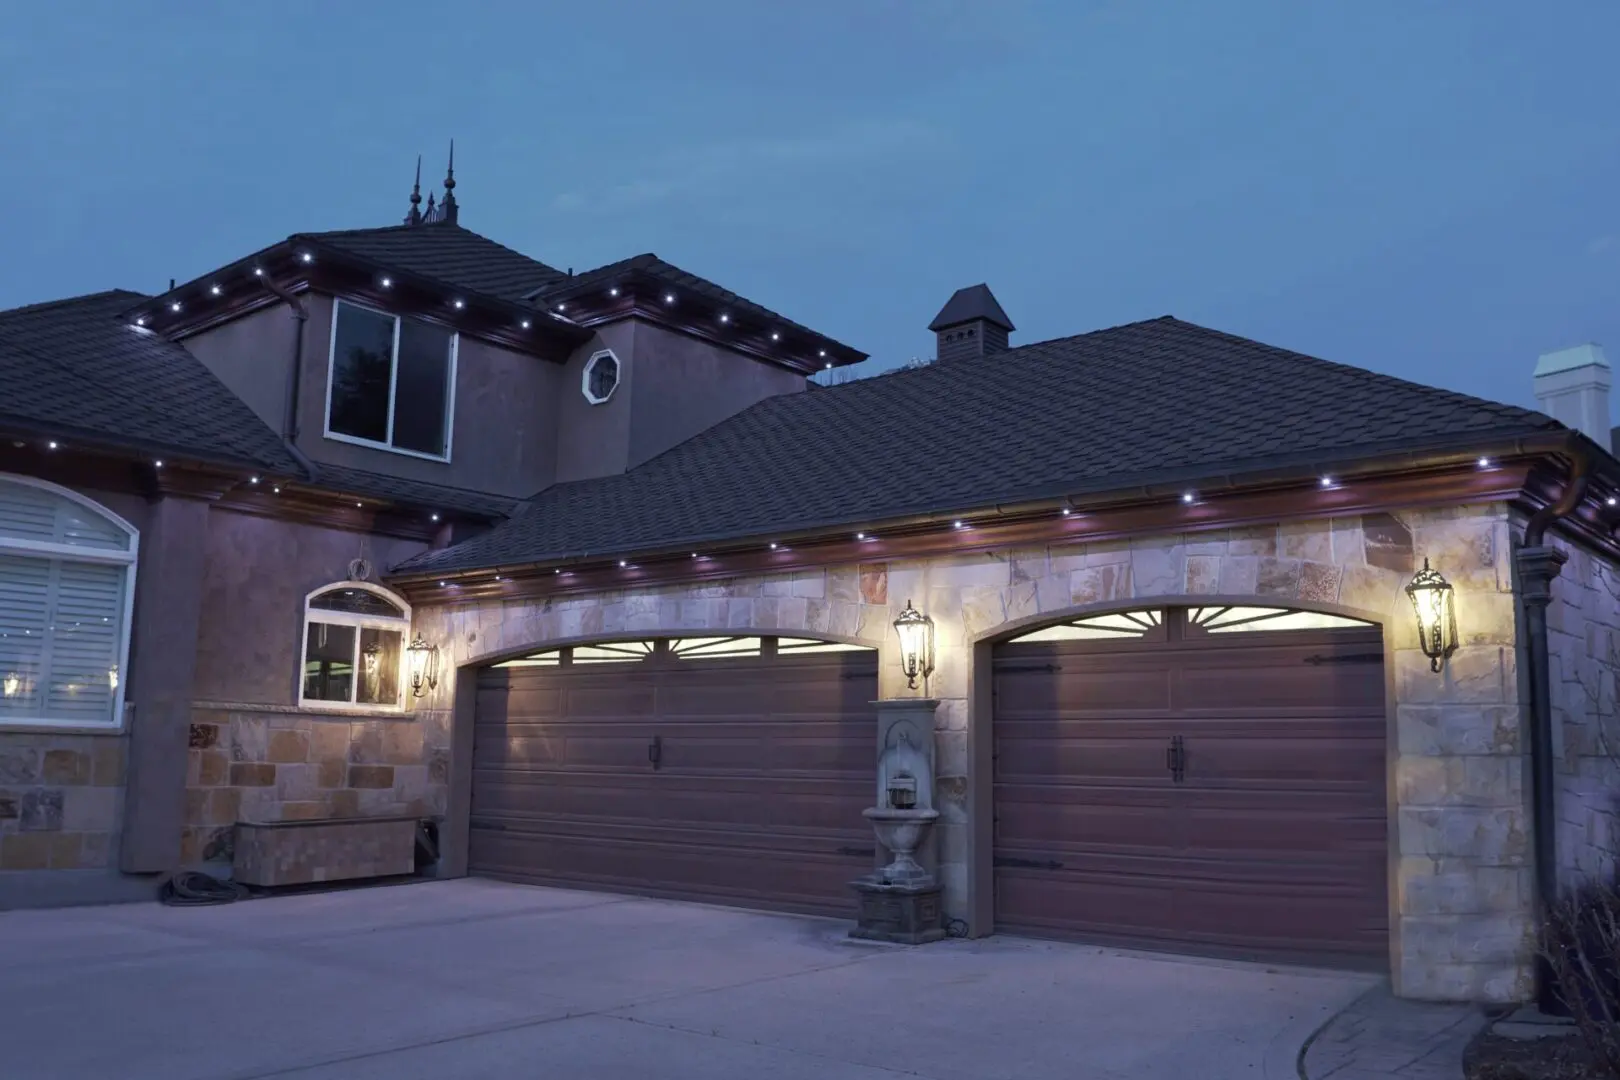 Lighting systems for the outdoor garage